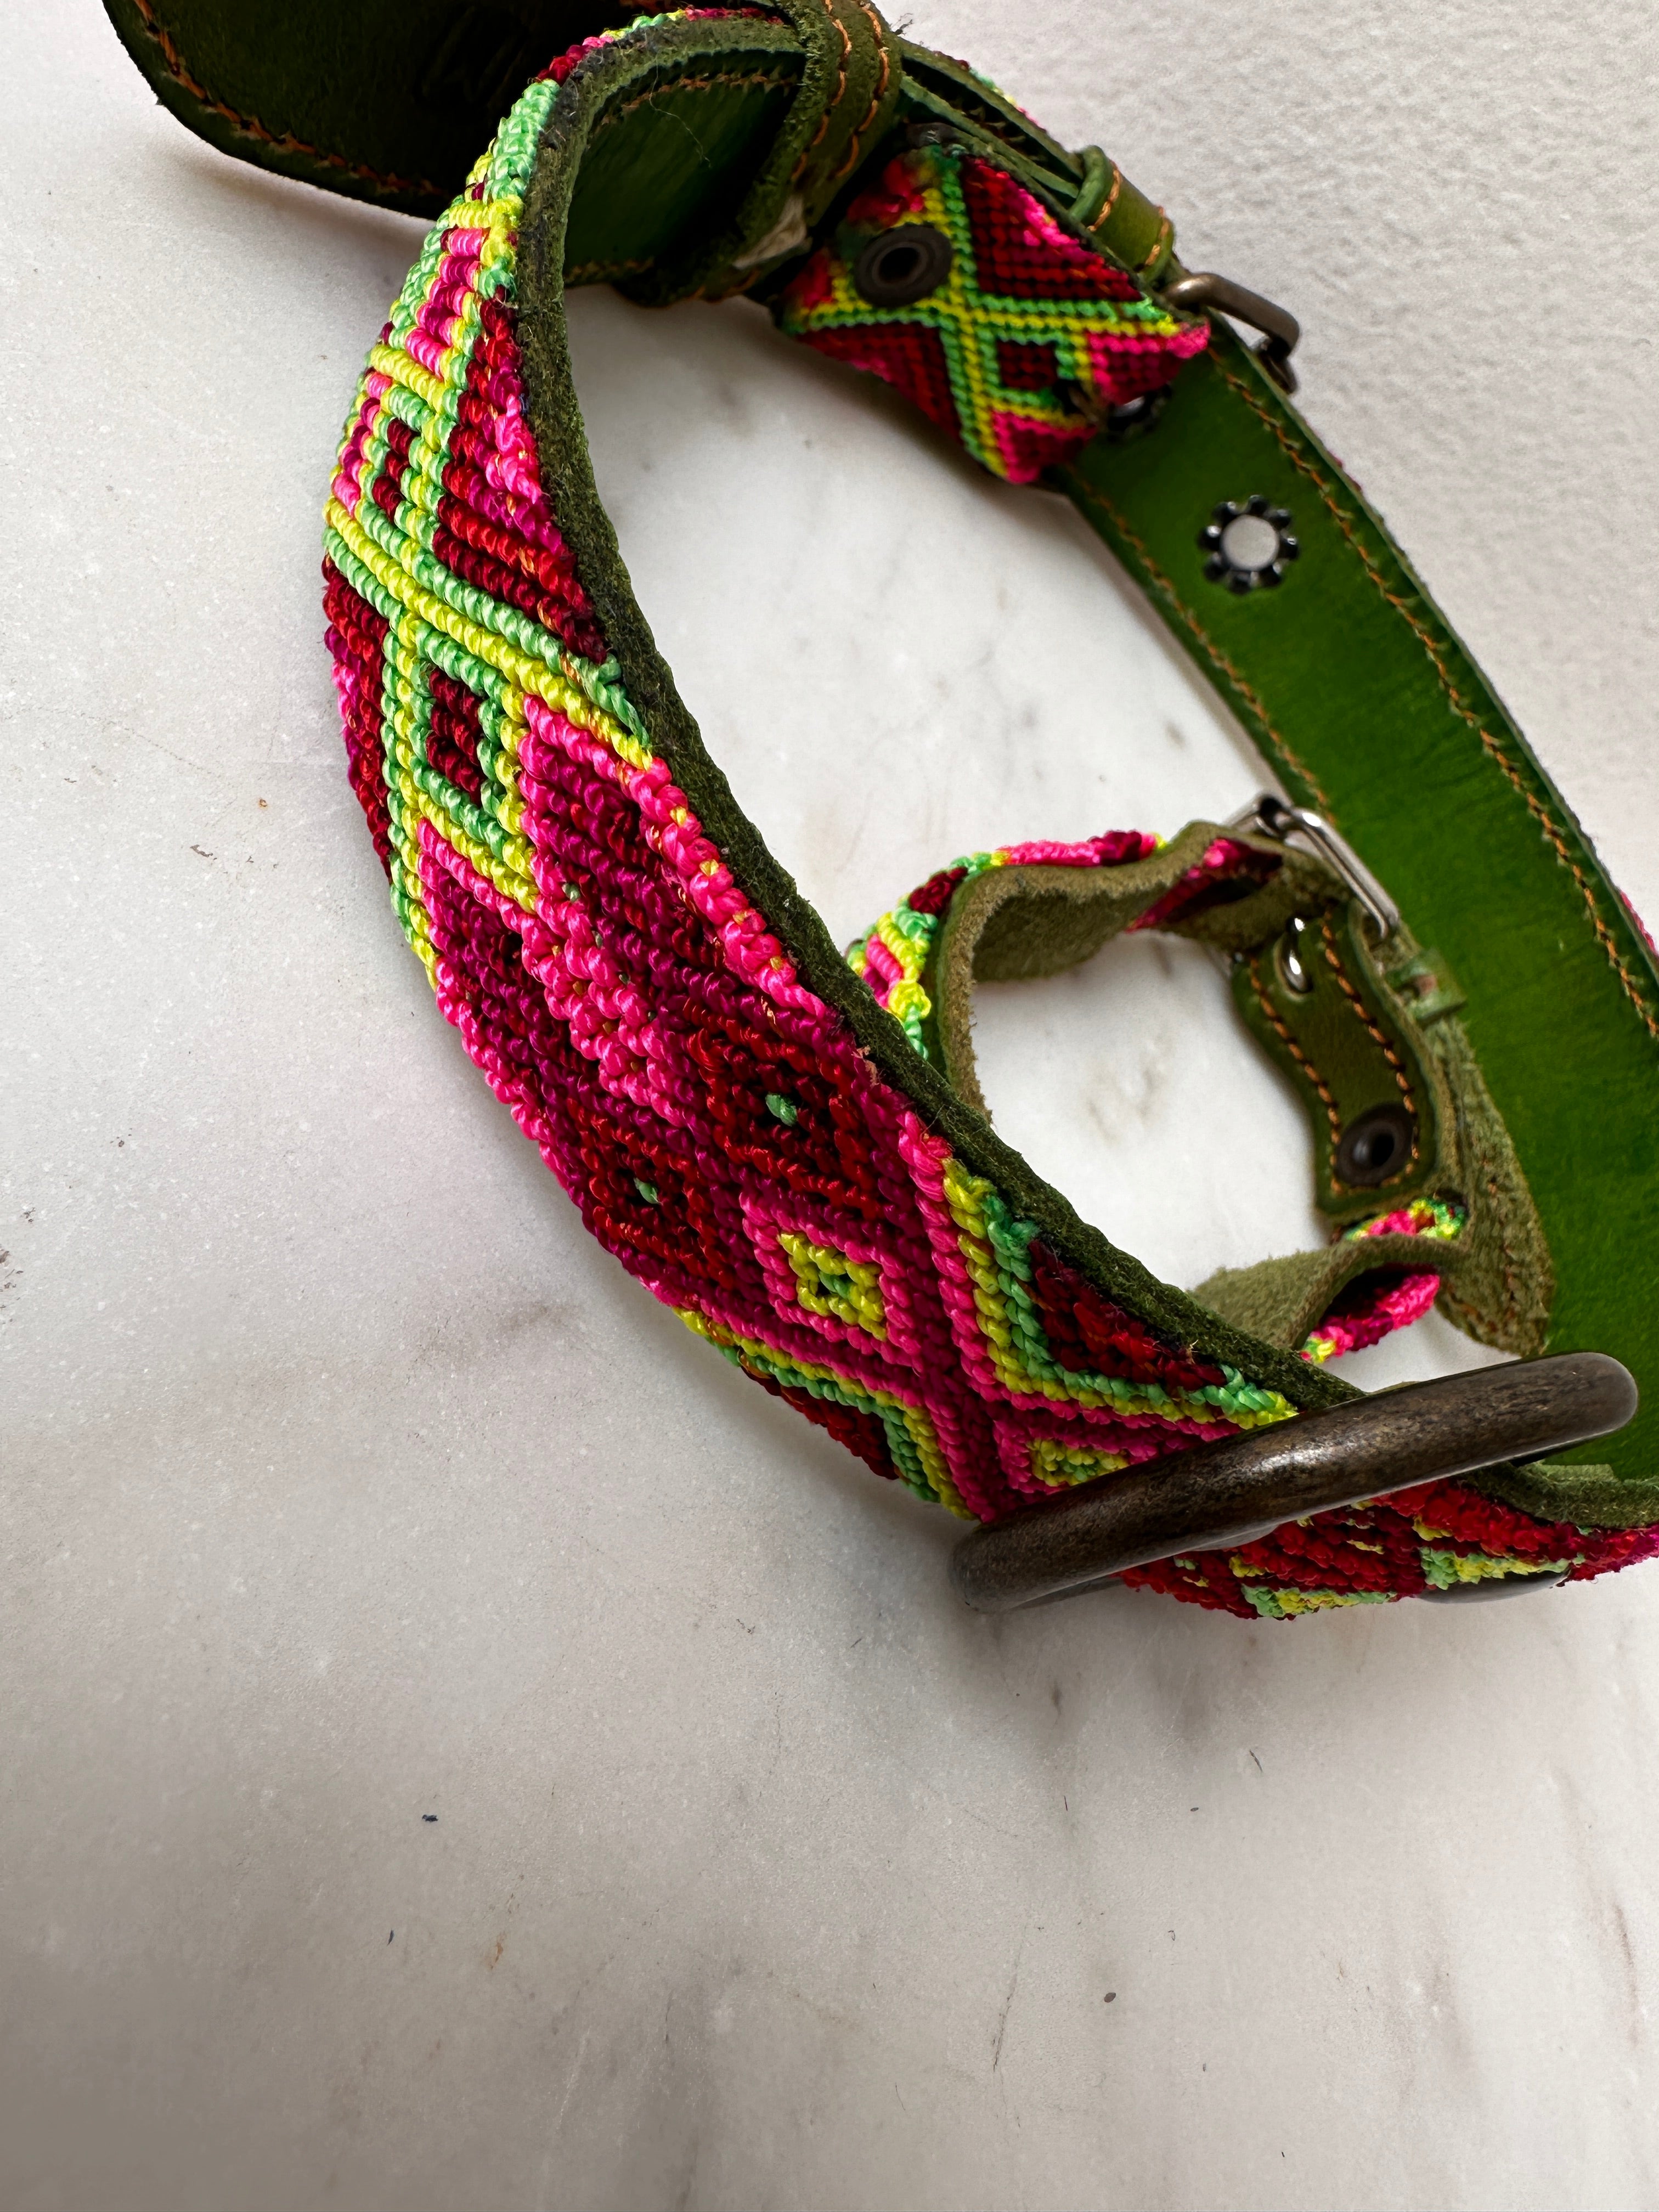 Future Nomads Homewares One Size Huichol Fully Embroidered Dog Collar M4